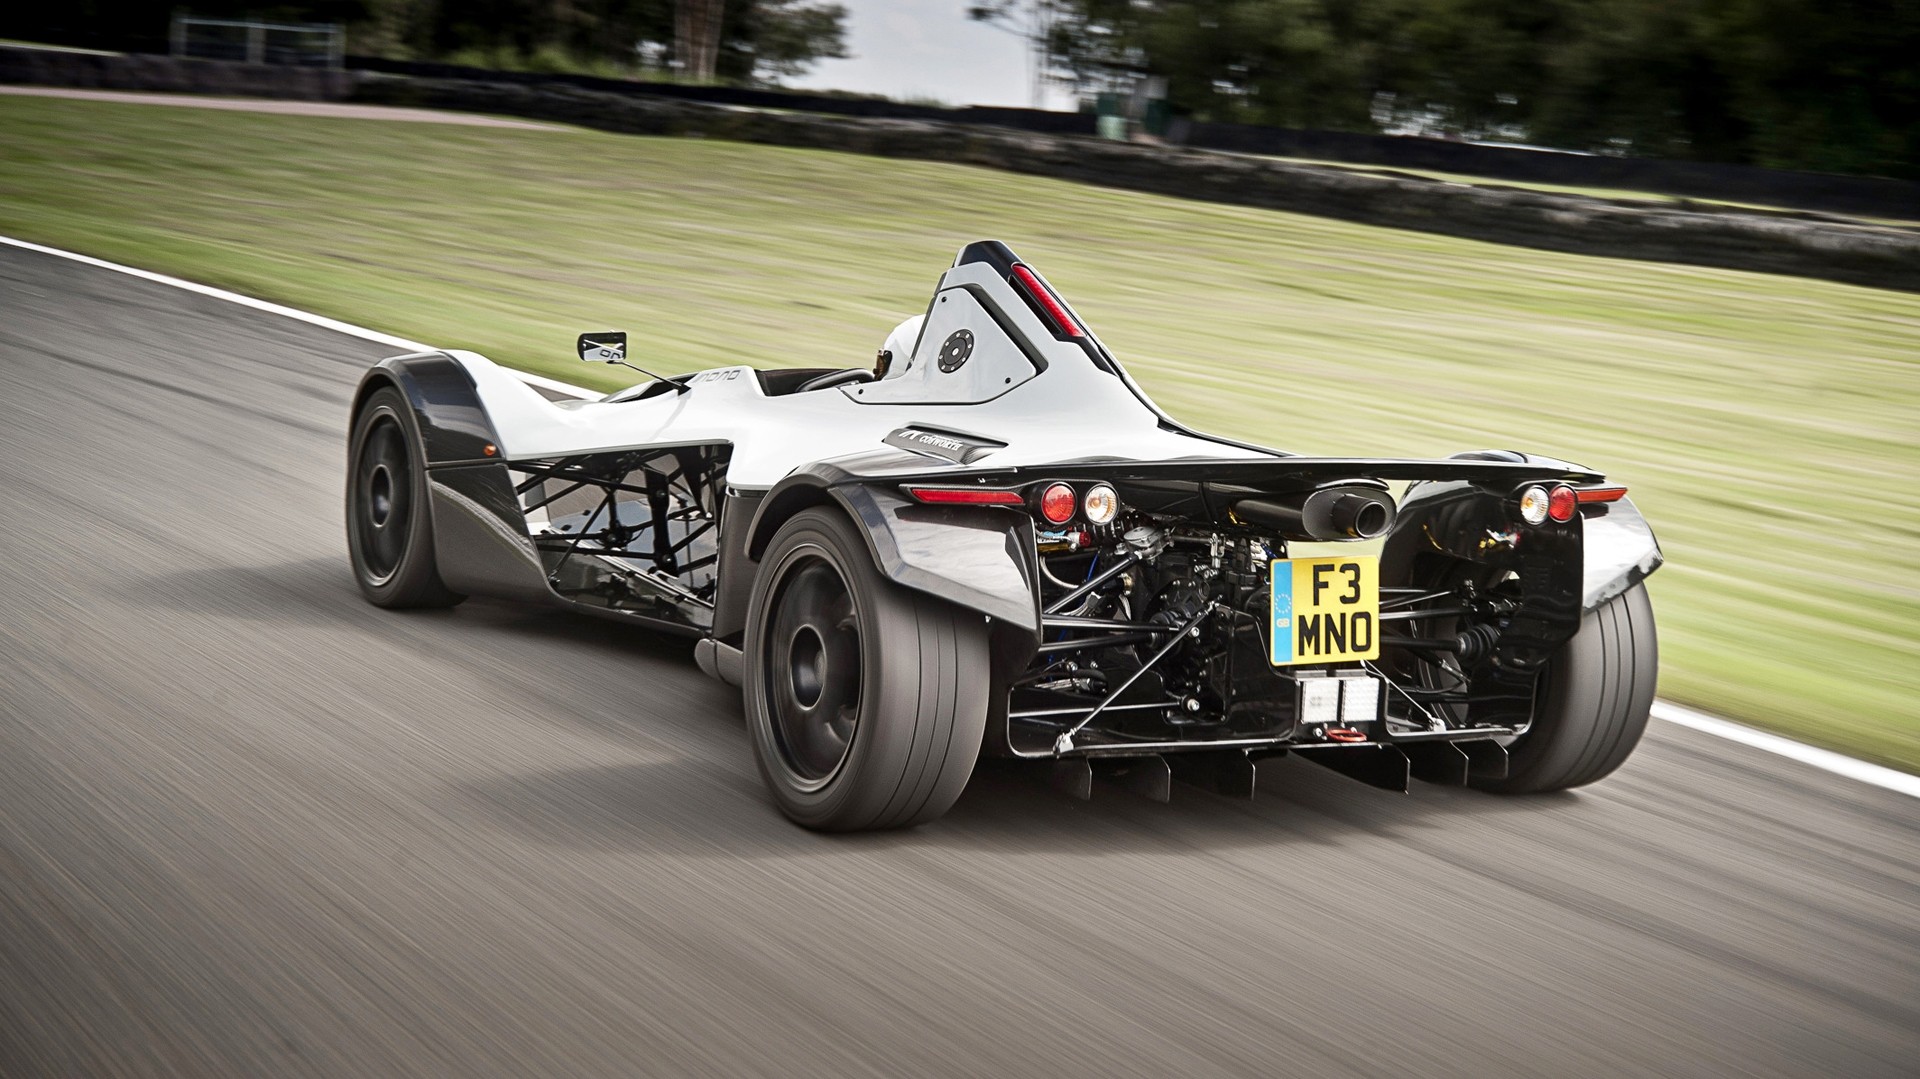 Bac mono race tracks car wallpapers hd desktop and mobile backgrounds